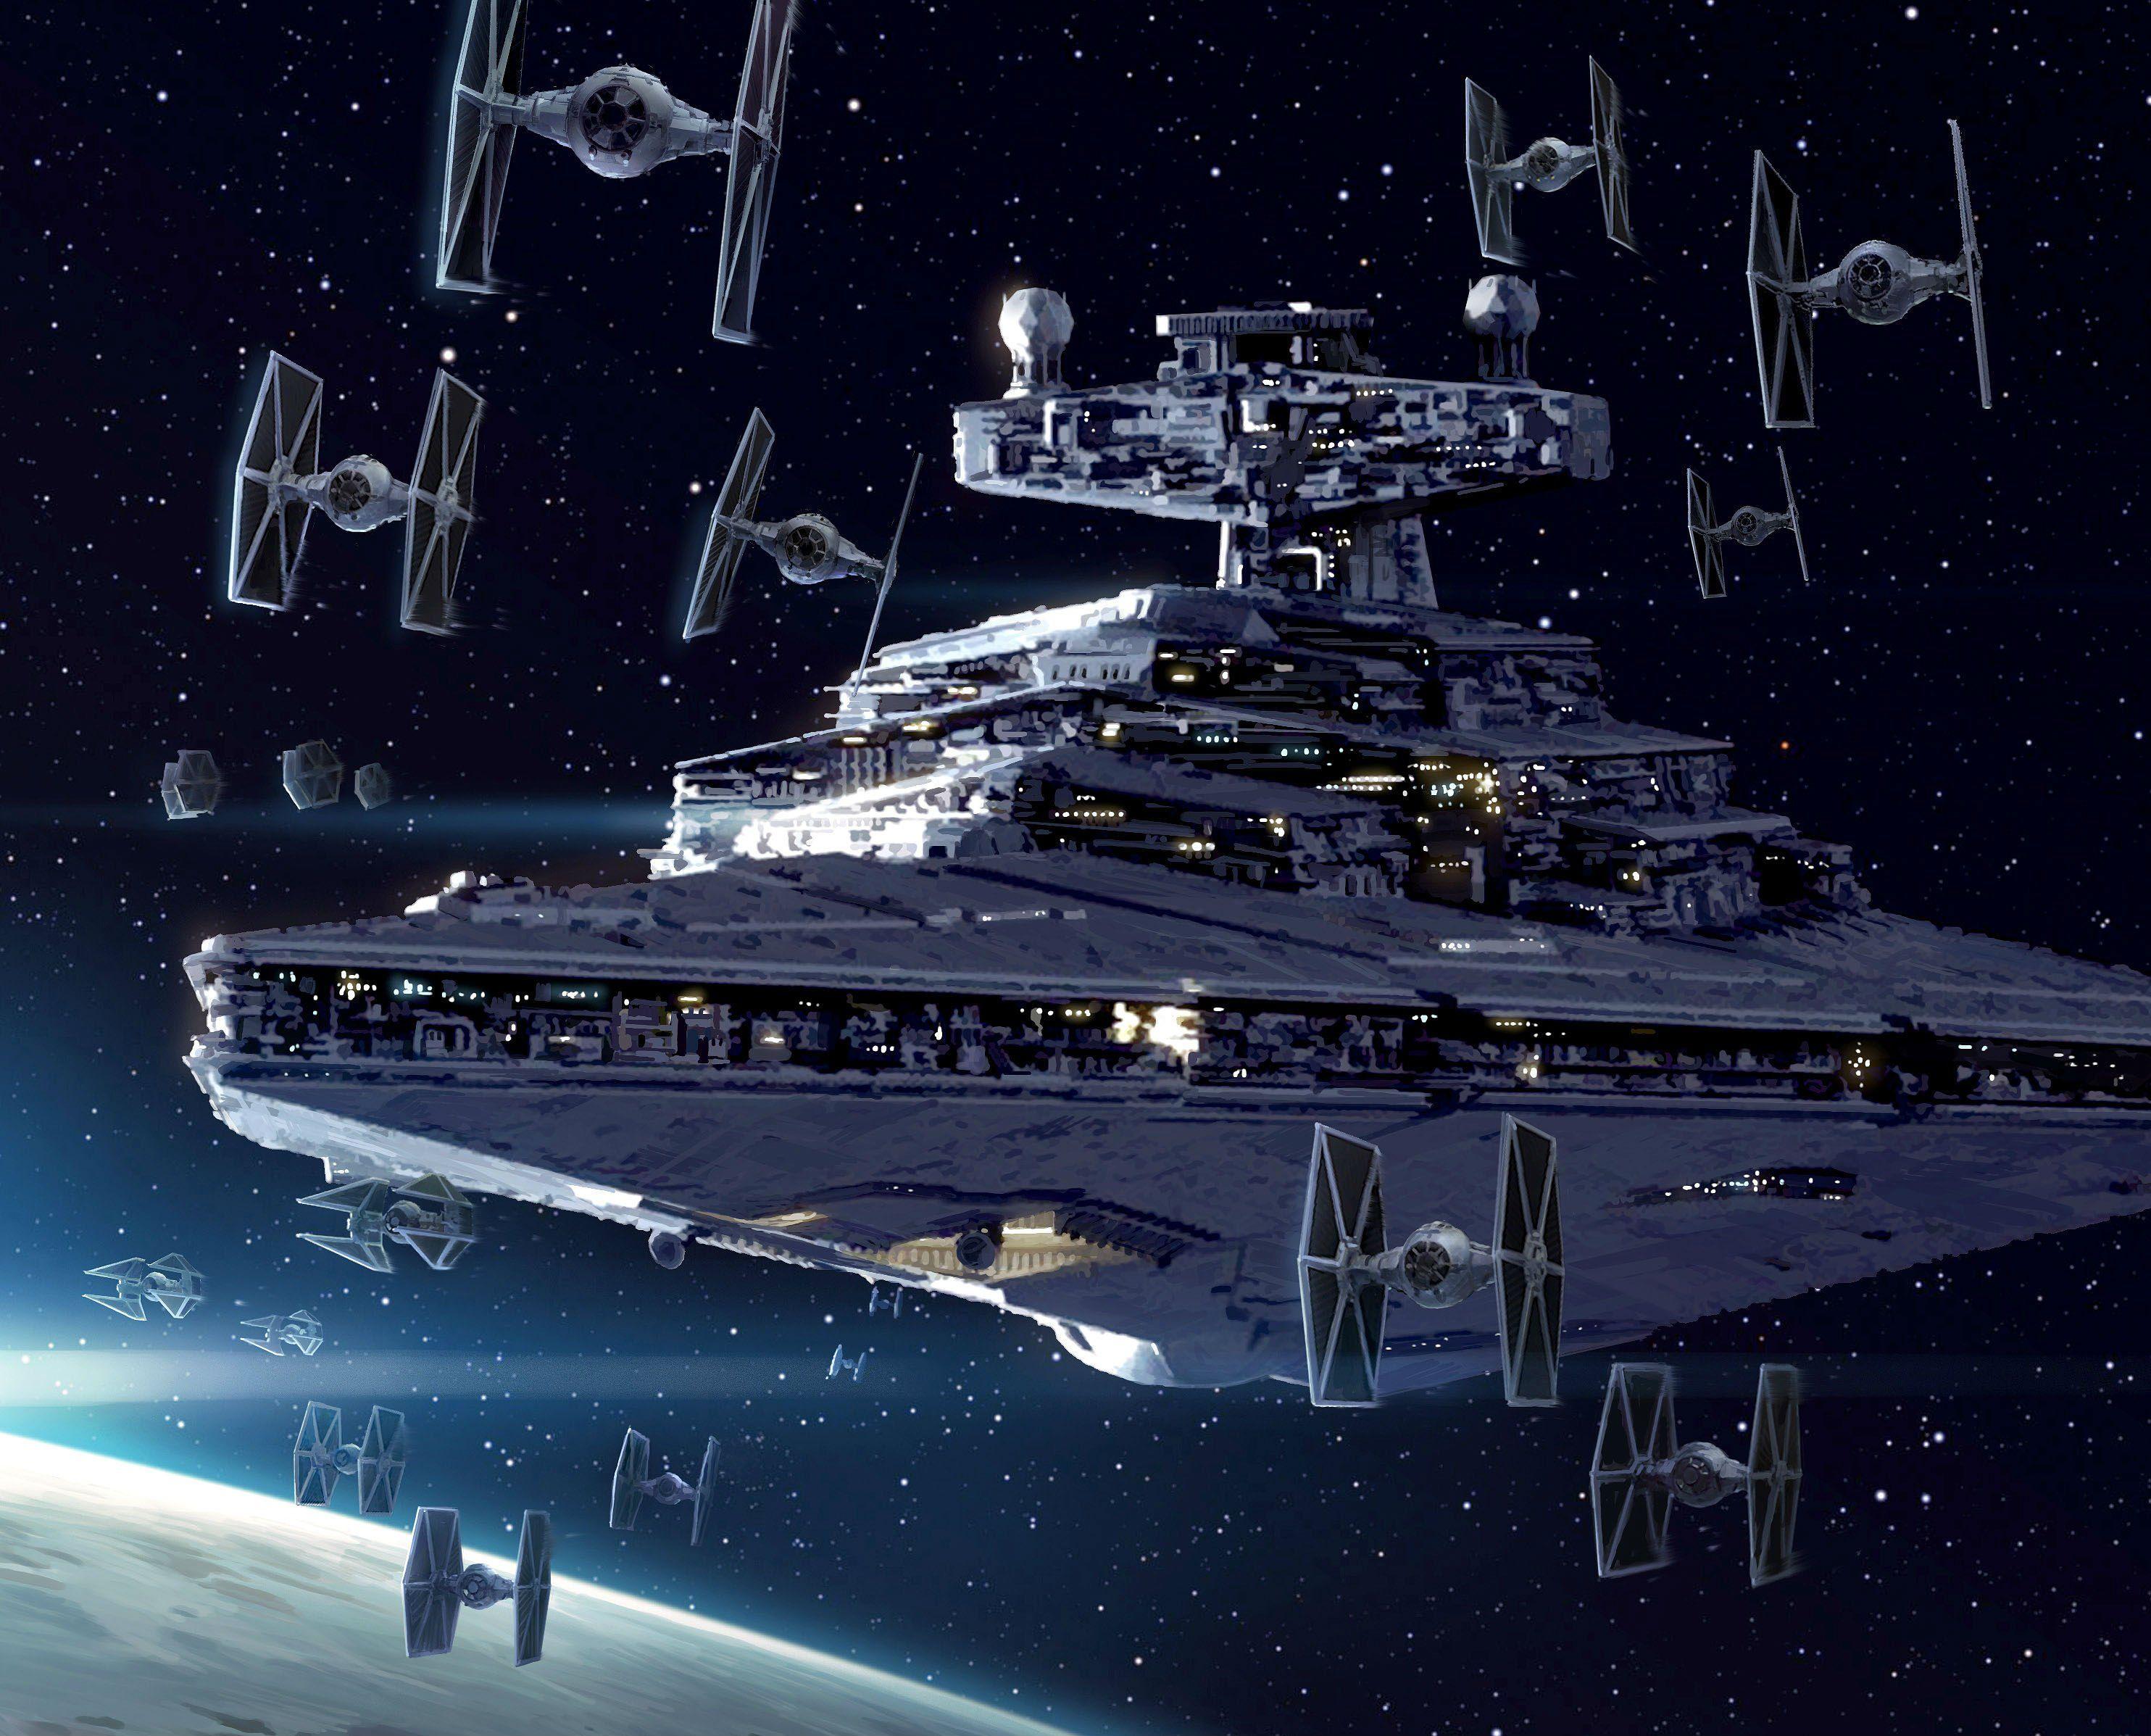 Star Wars Star Destroyer Wallpapers Top Free Star Wars Star Destroyer